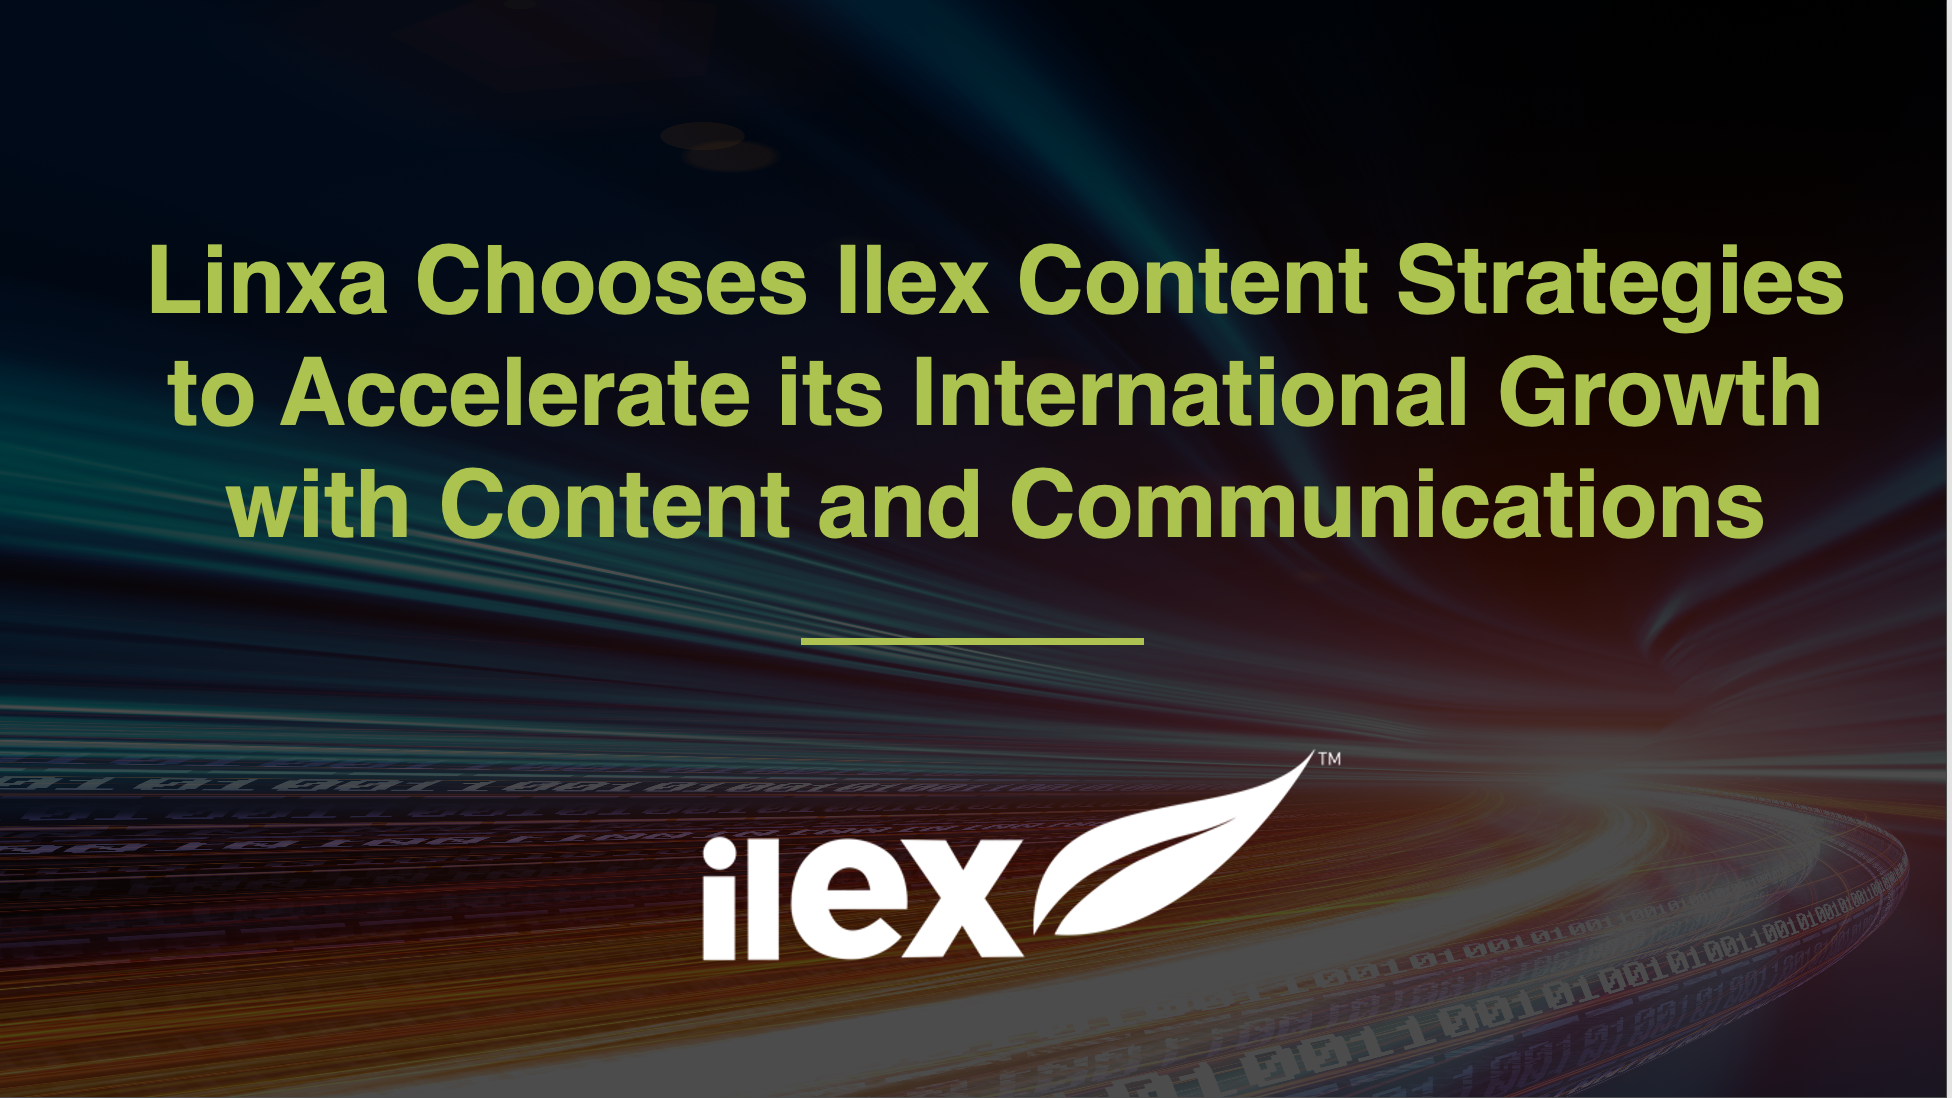 Linxa Chooses Ilex Content Strategies to Accelerate its International Growth with Content and Communications